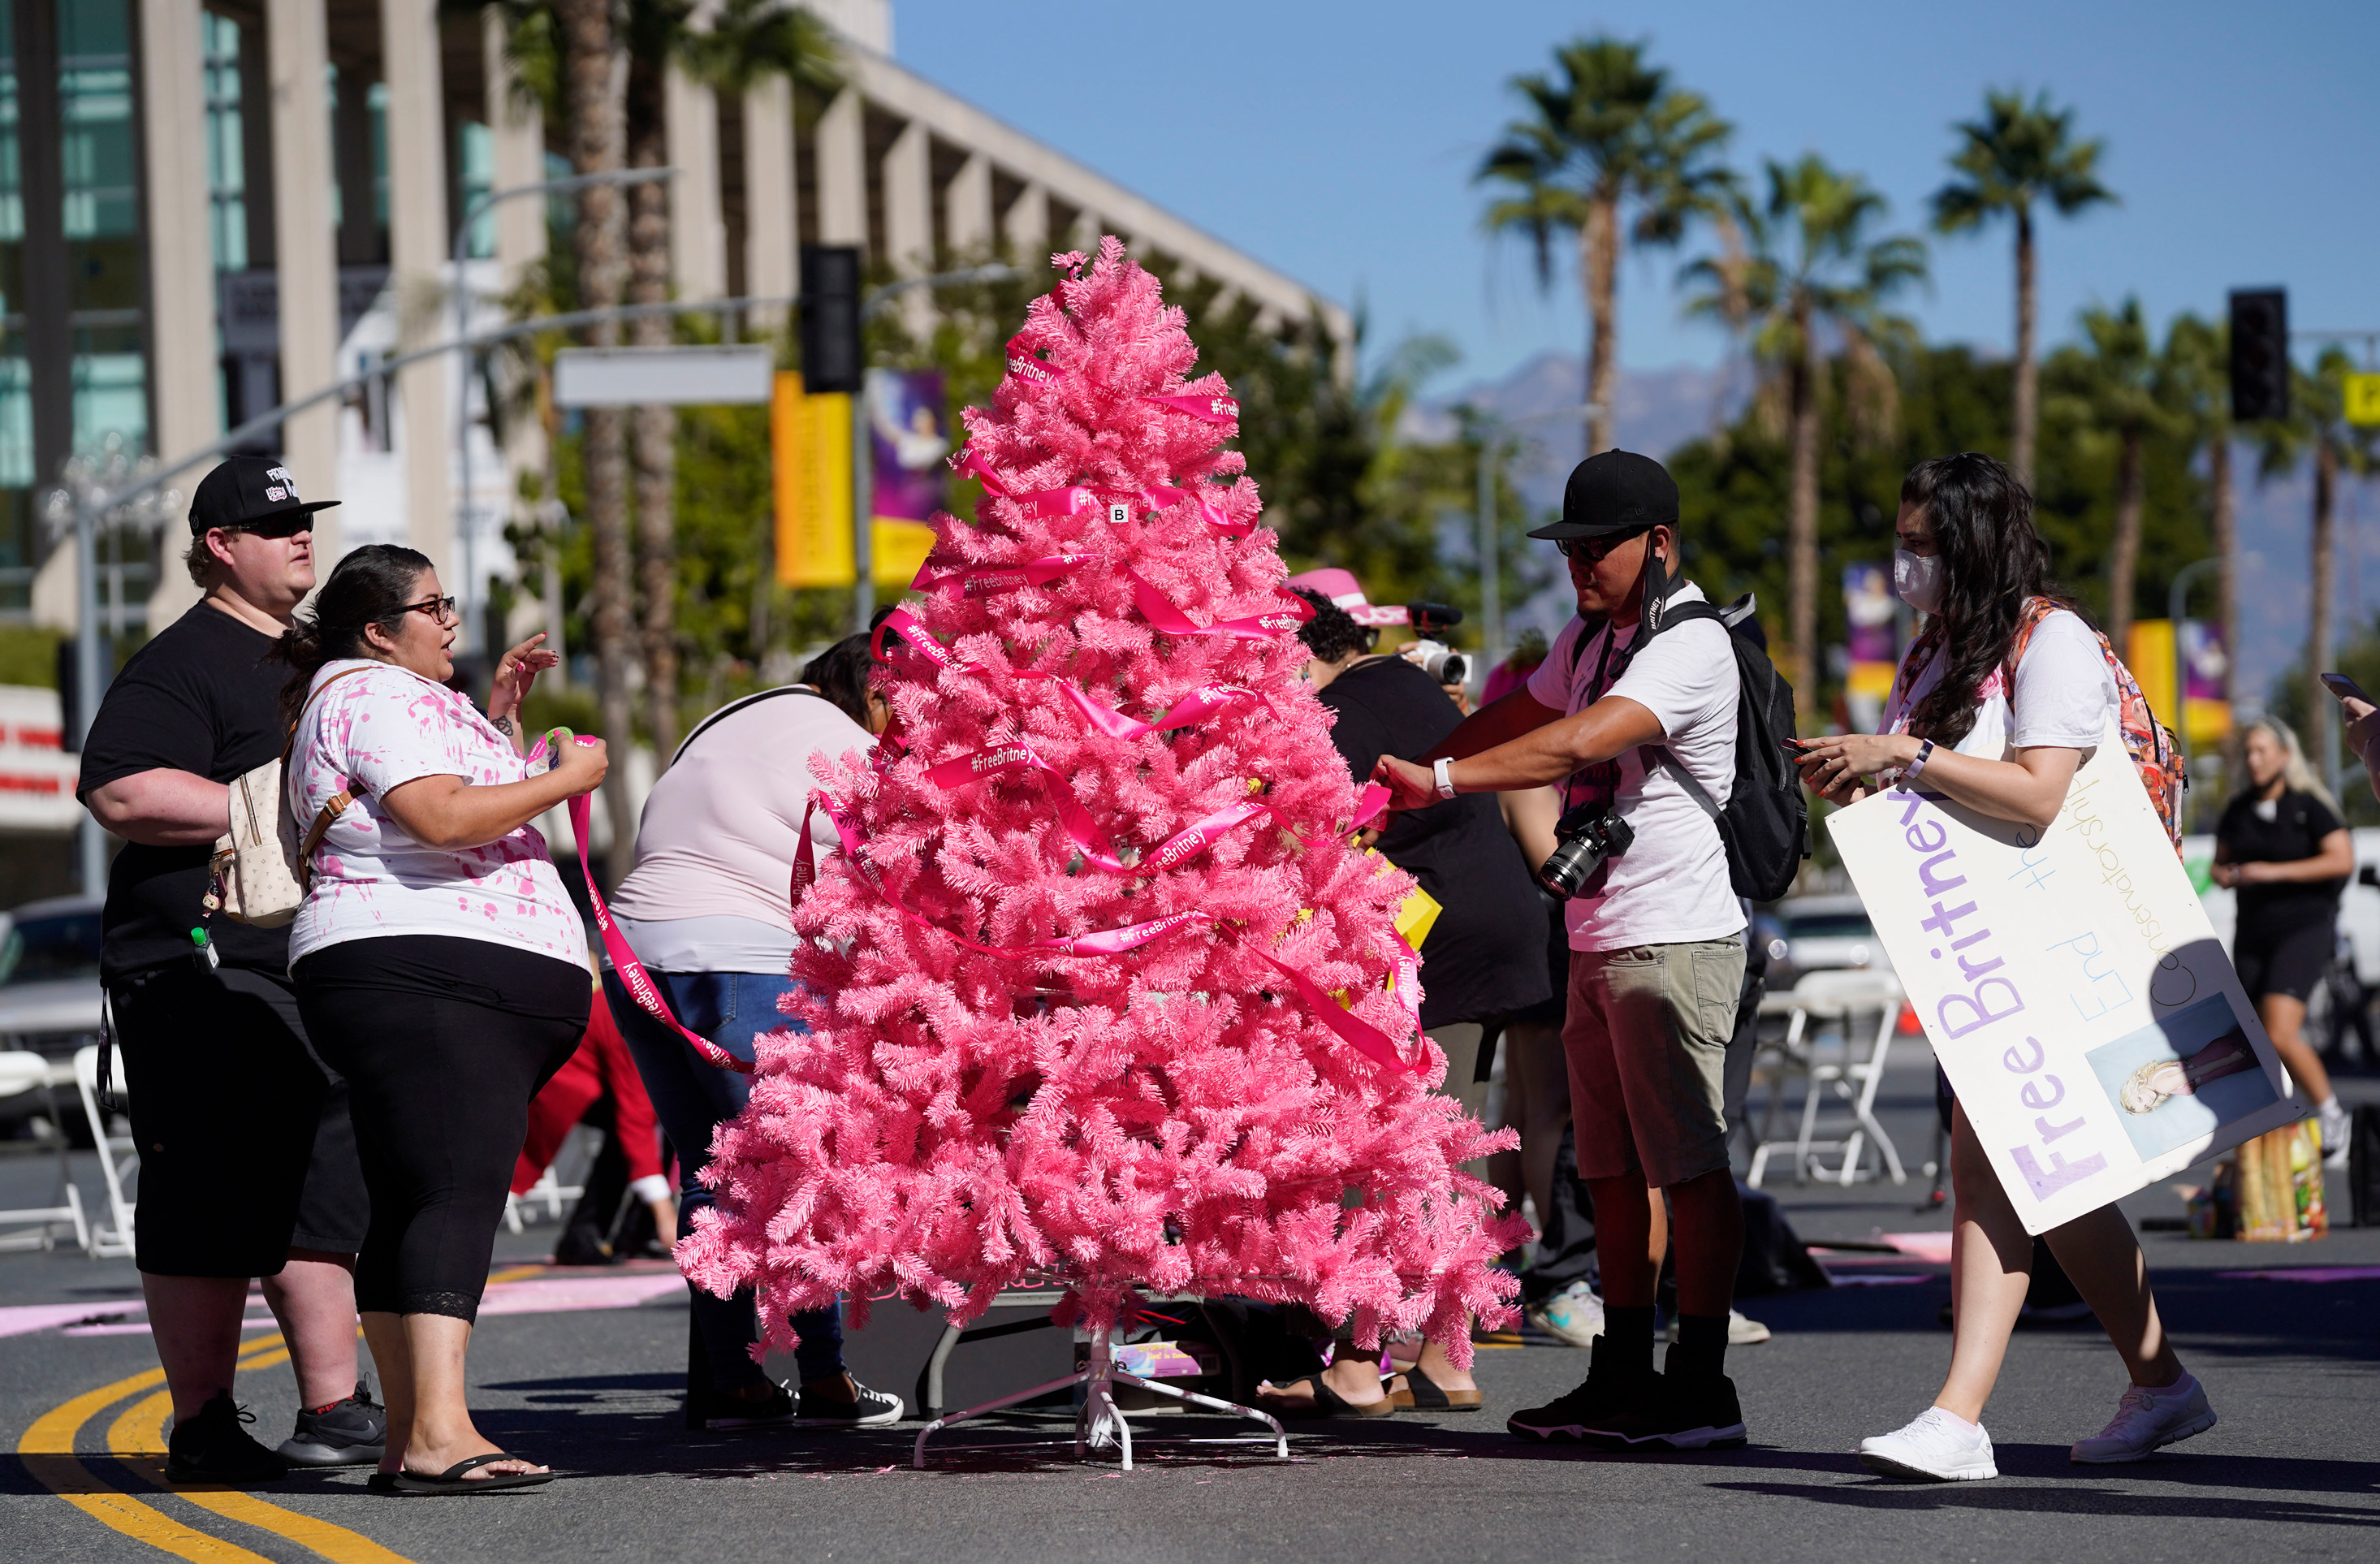 Britney Spears supporters decorate a pink "Free Britney" Christmas tree.